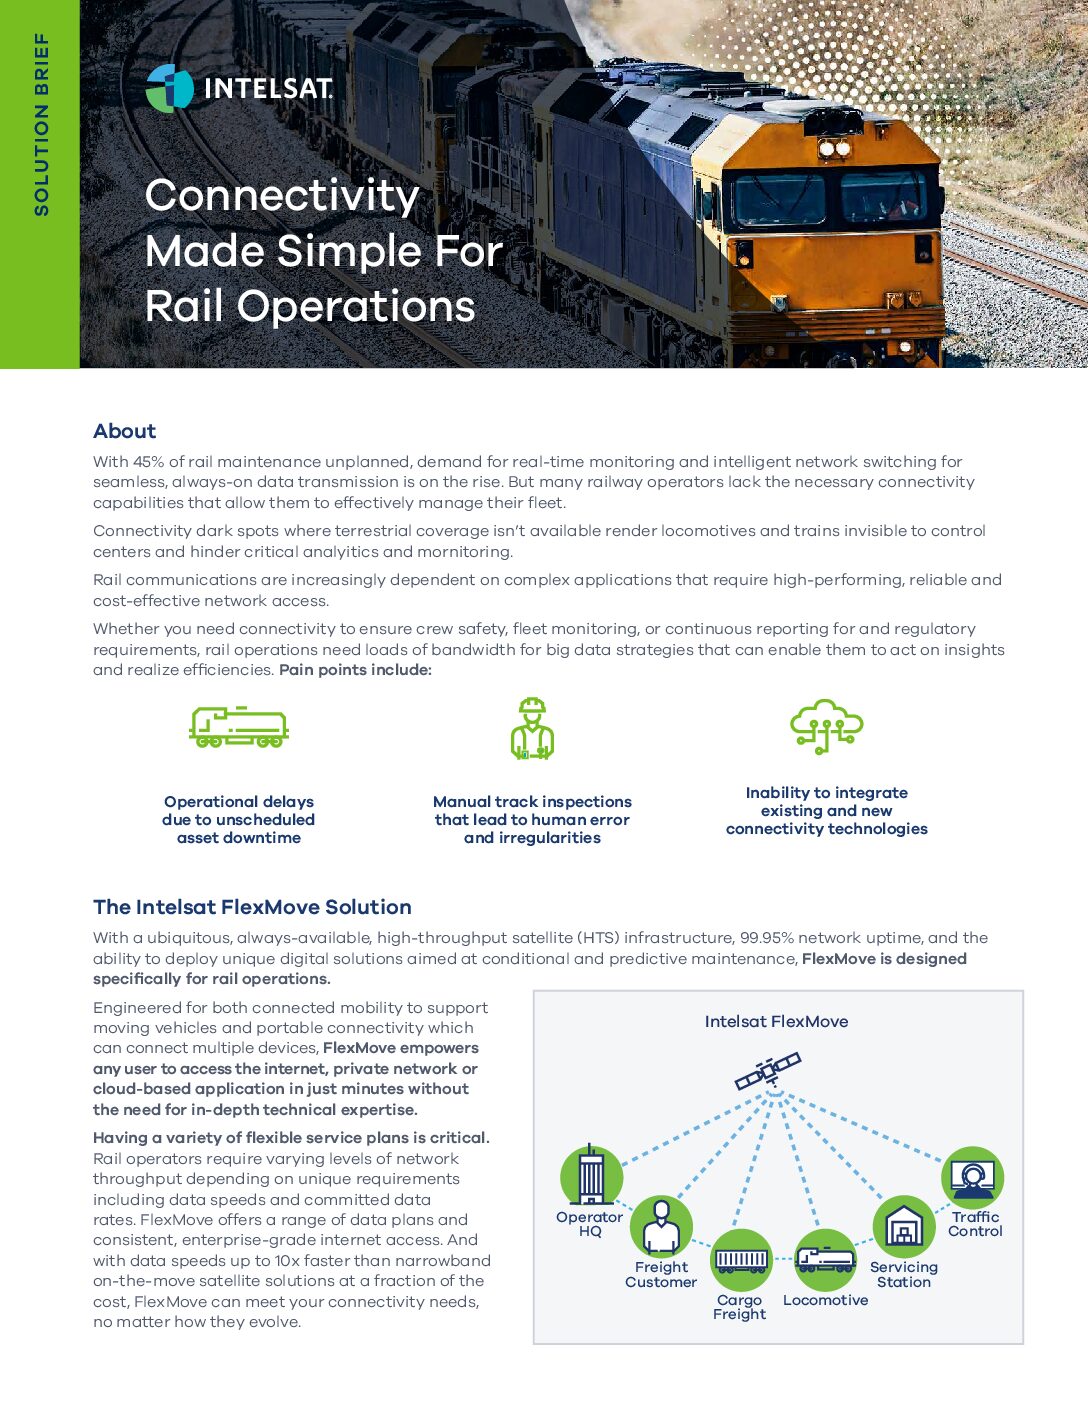 Intelsat: Connectivity Made Simple For Rail Operations